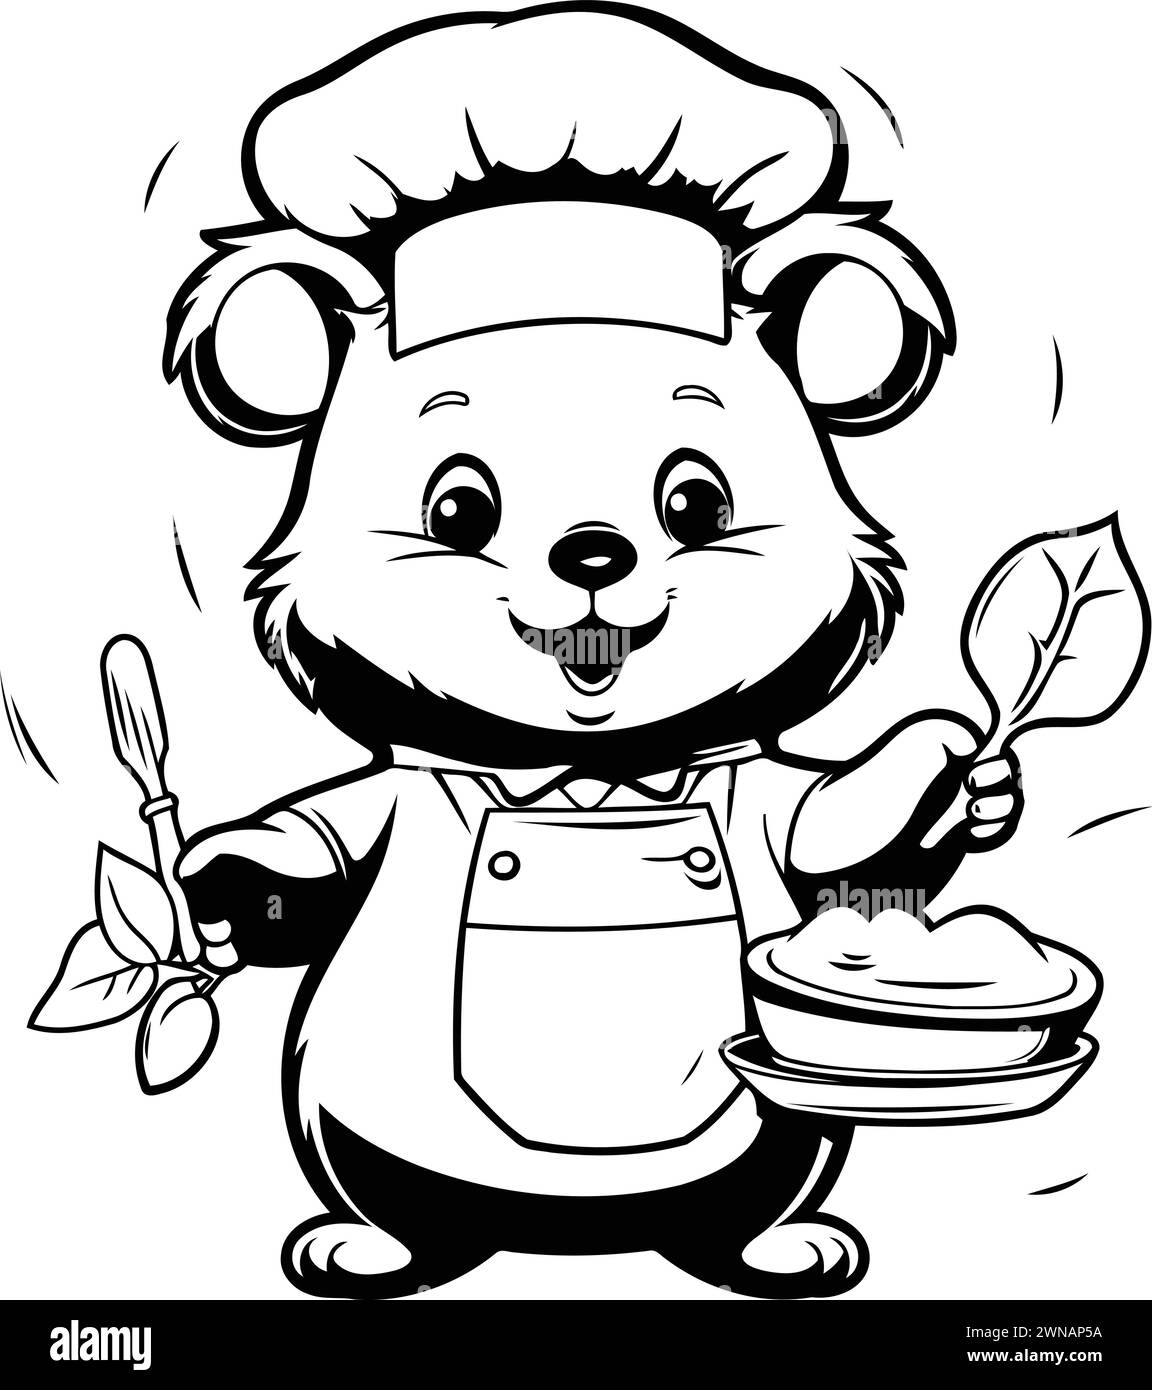 Black and White Cartoon Illustration of Cute Animal Chef with Spoon and Plate for Coloring Book Stock Vector